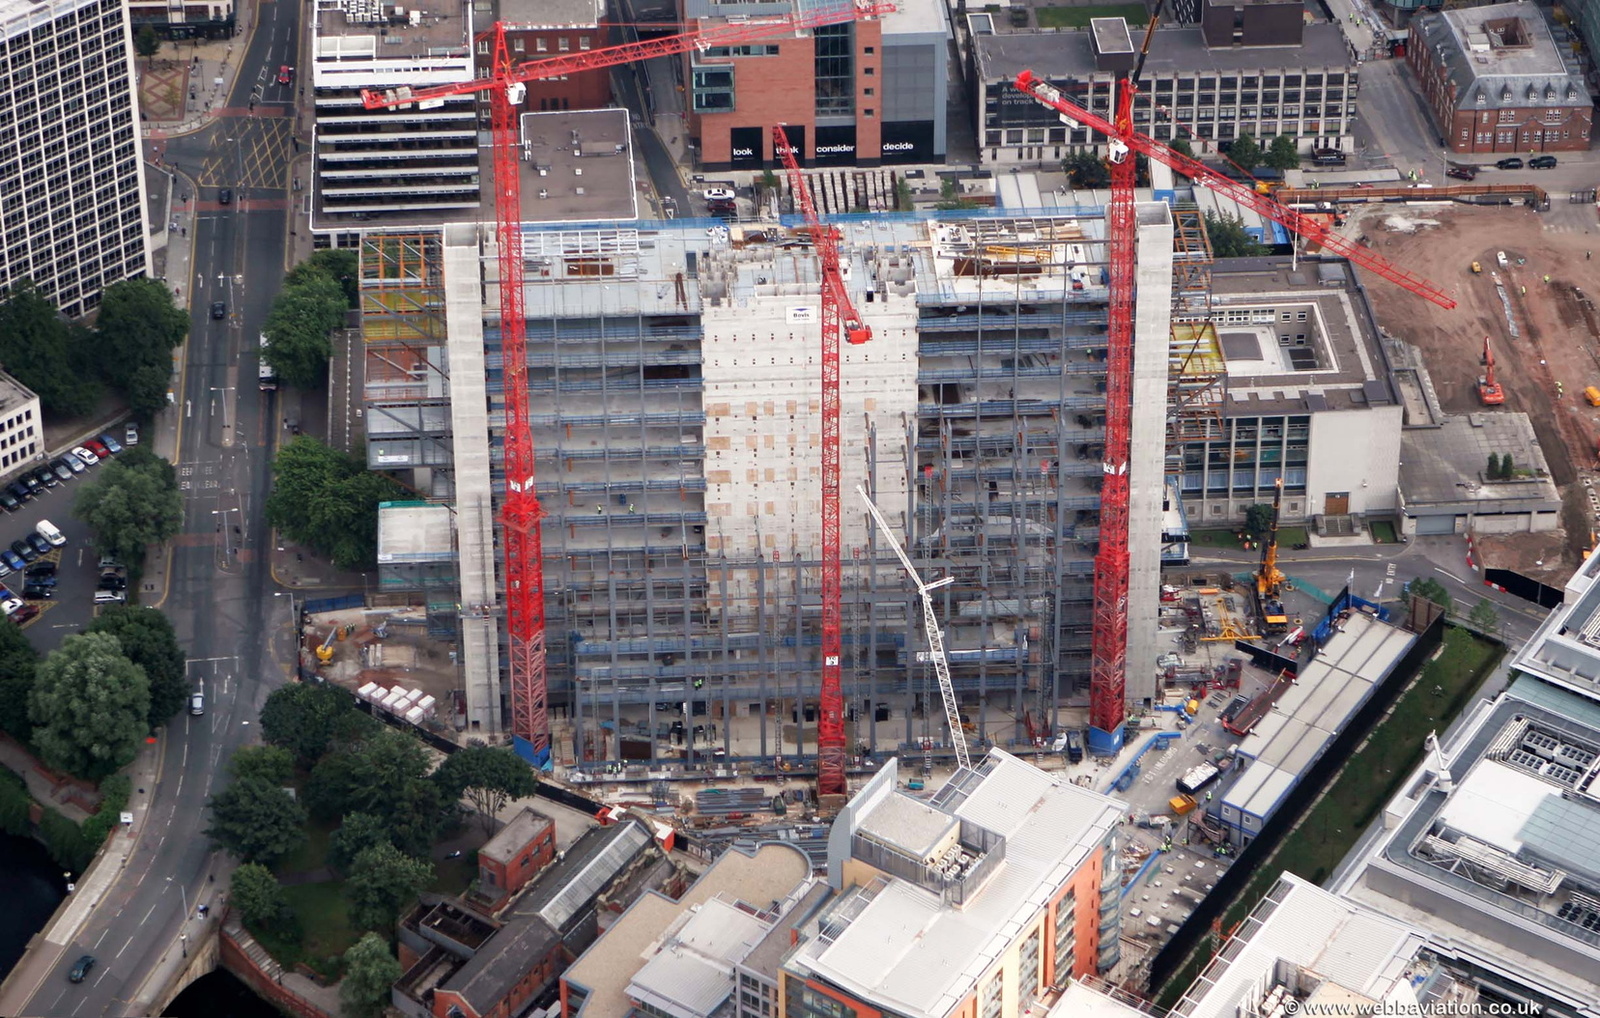  construction of the Civil Justice Building in Manchester aerial photo